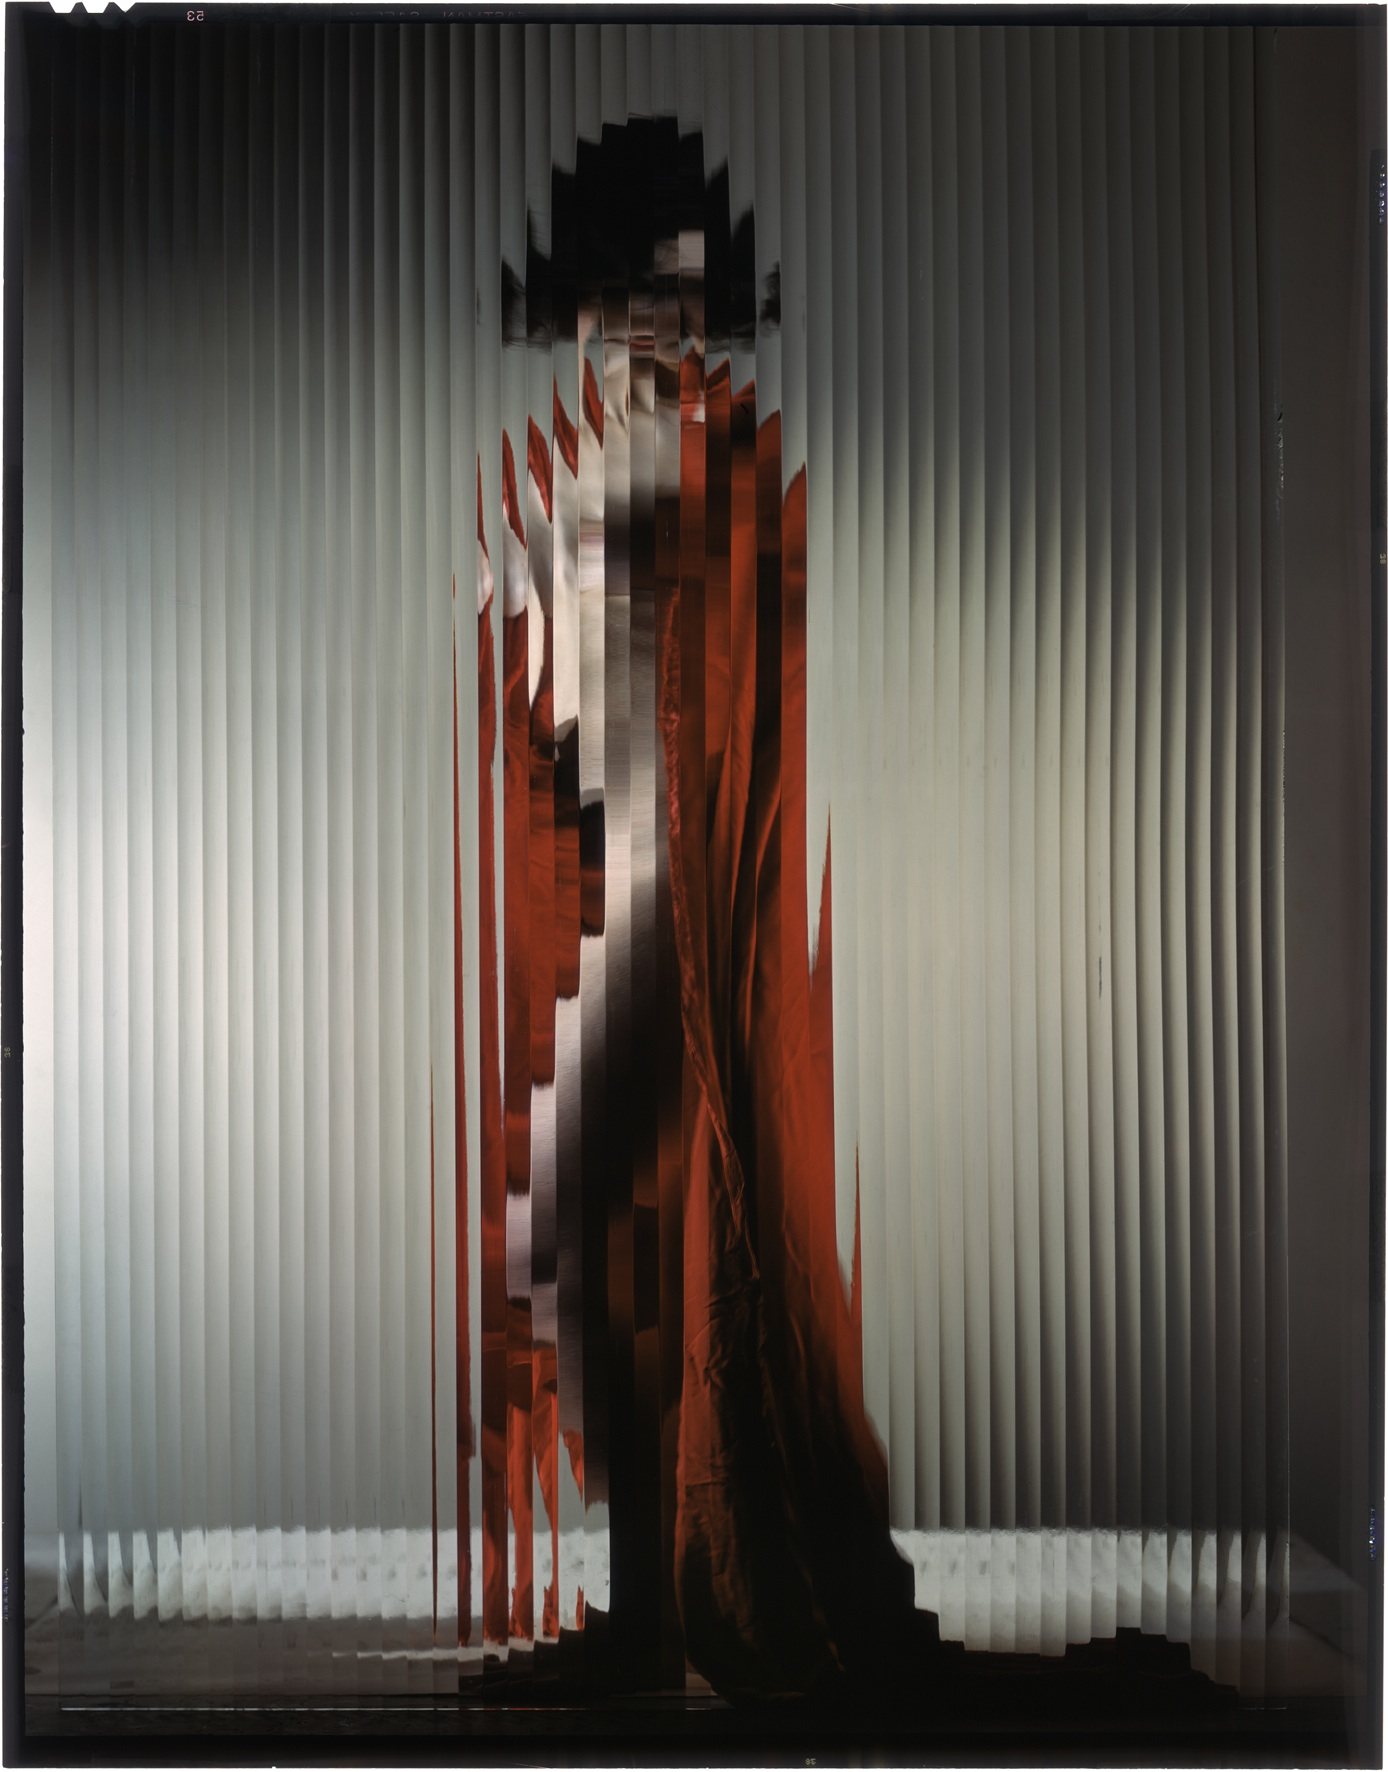 The Picasso Girl by Erwin Blumenfeld for Forbes Magazine